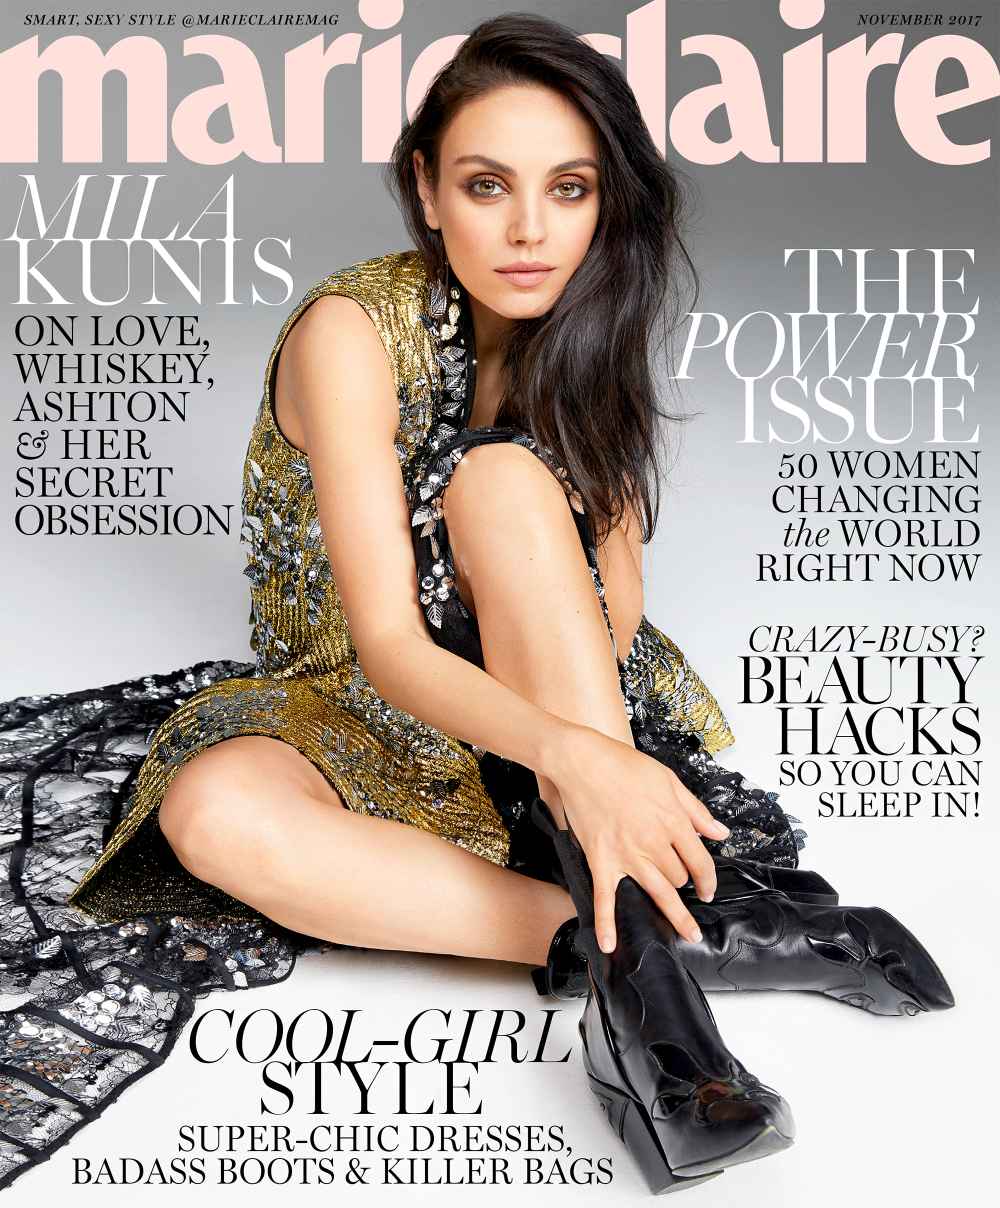 Mila Kunis on Marie Claire Cover